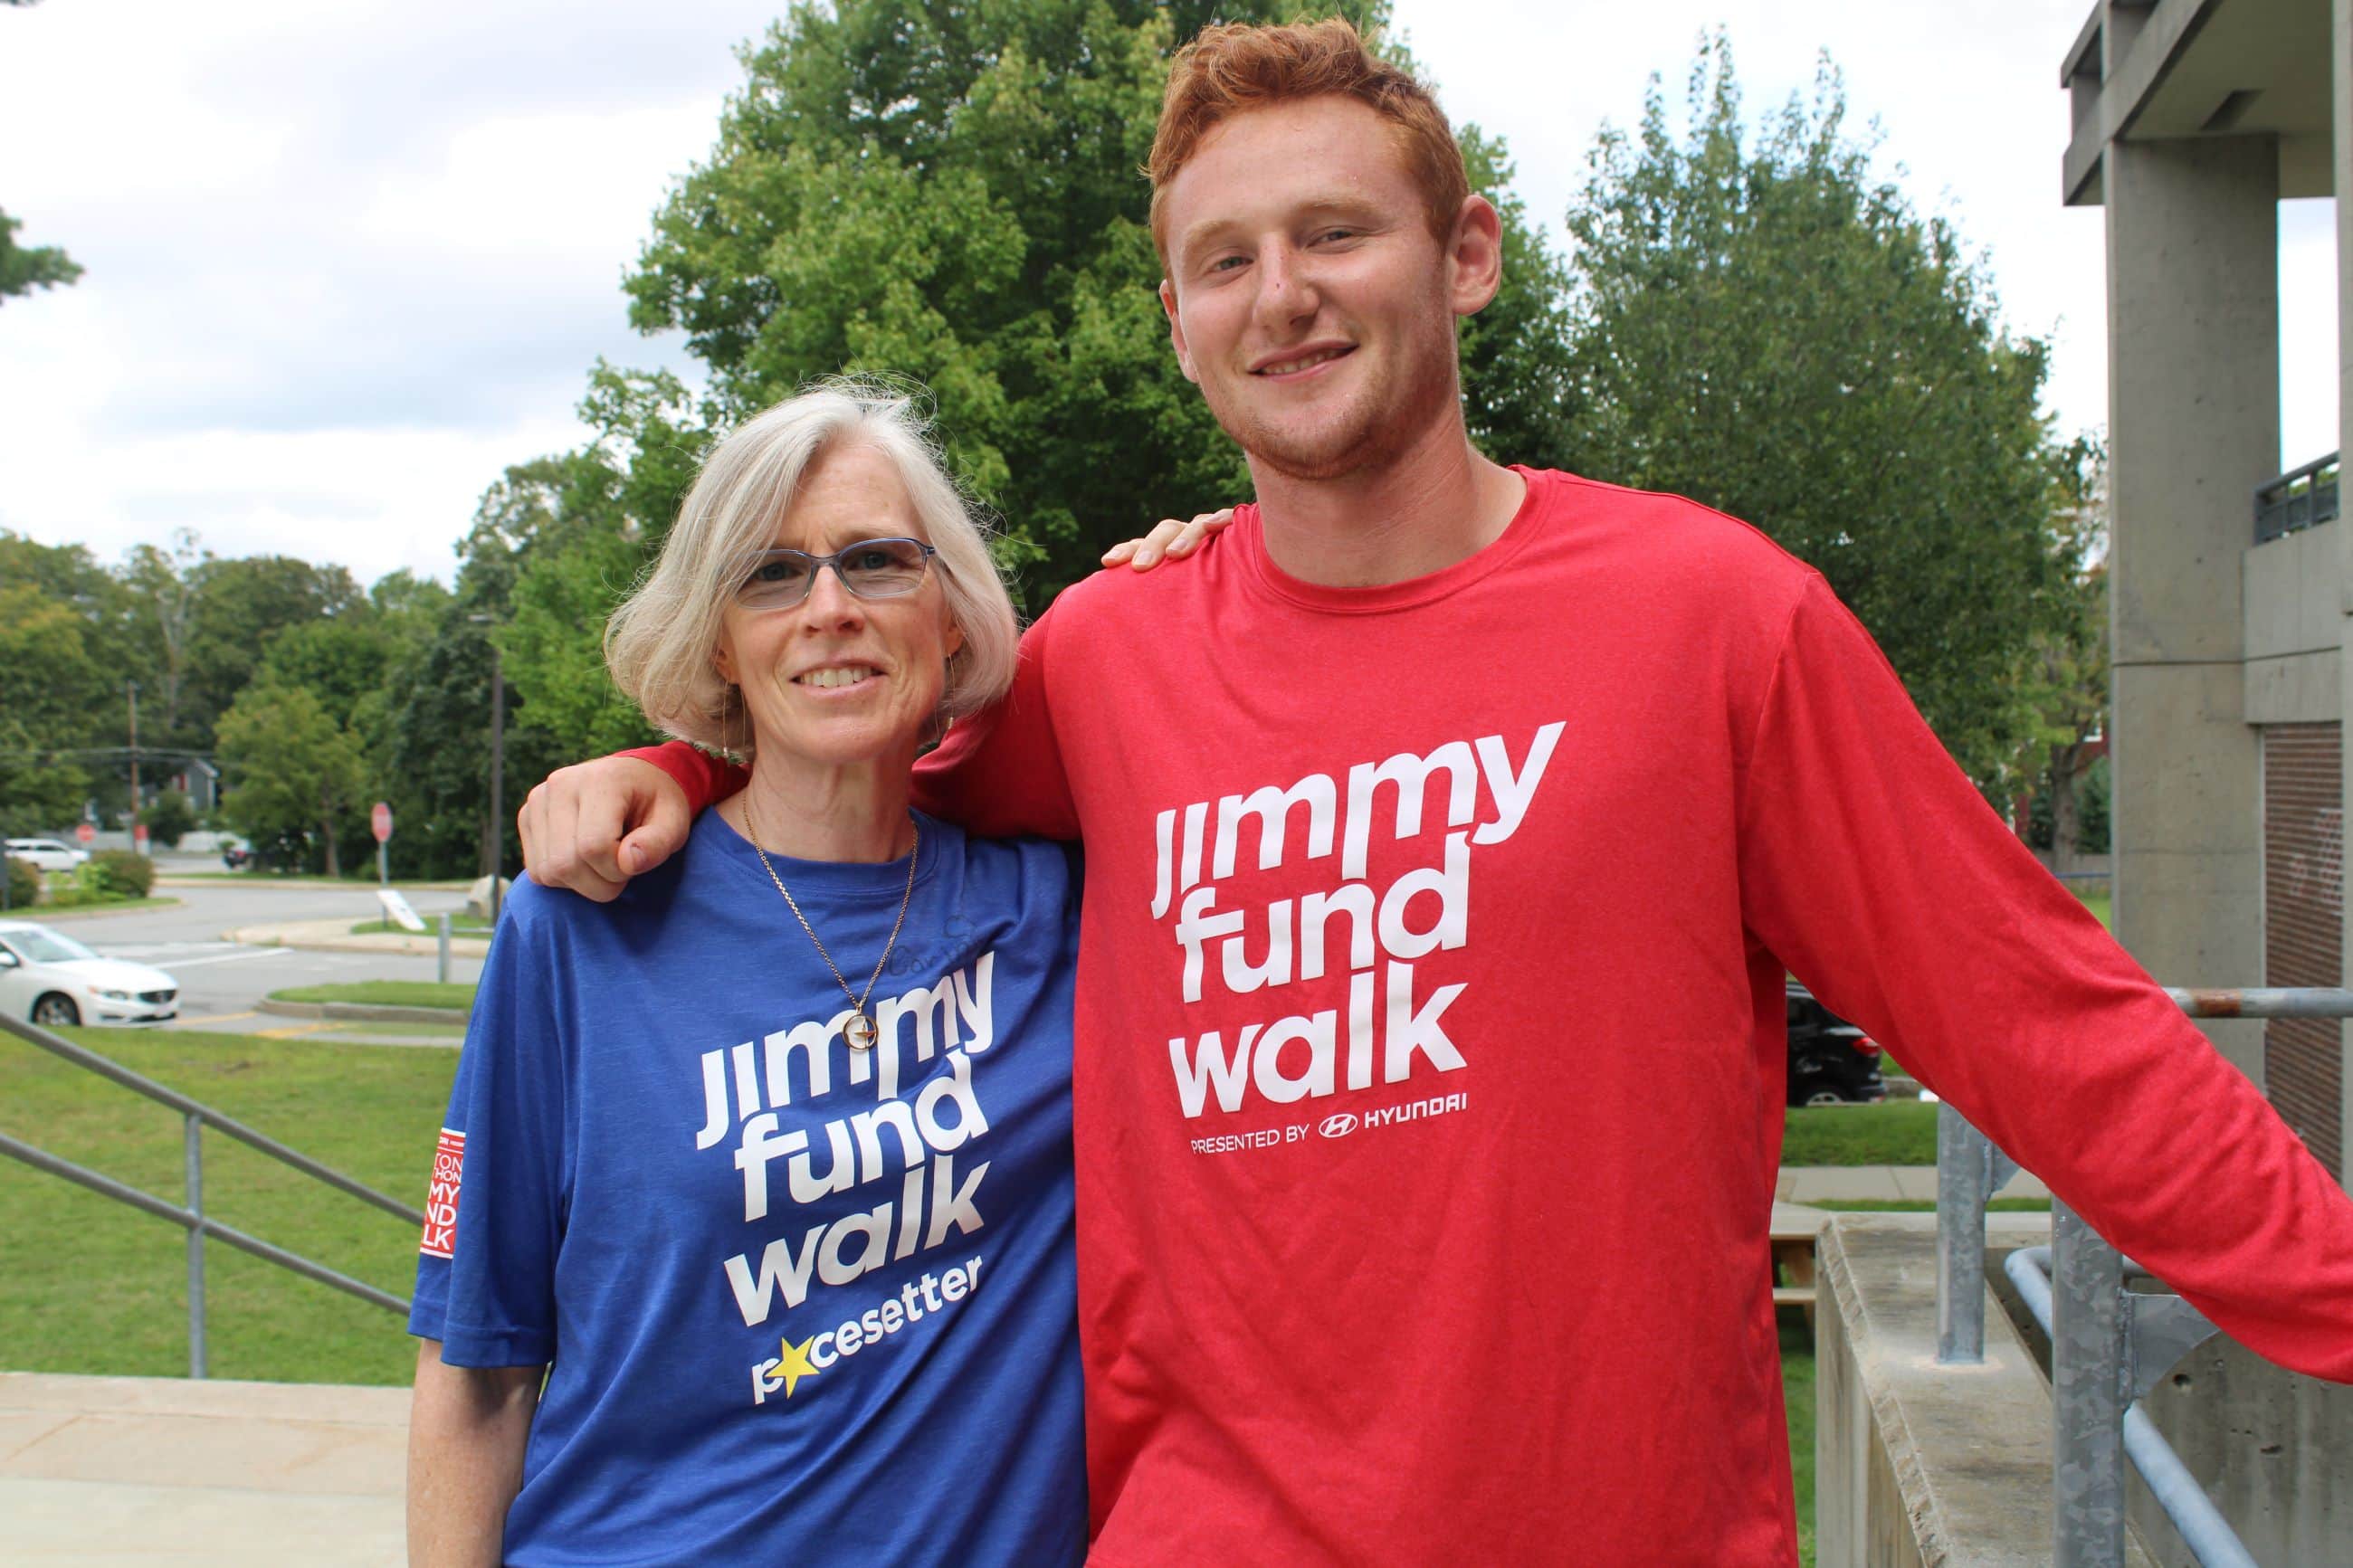 Local residents taking part in Jimmy Fund Walk